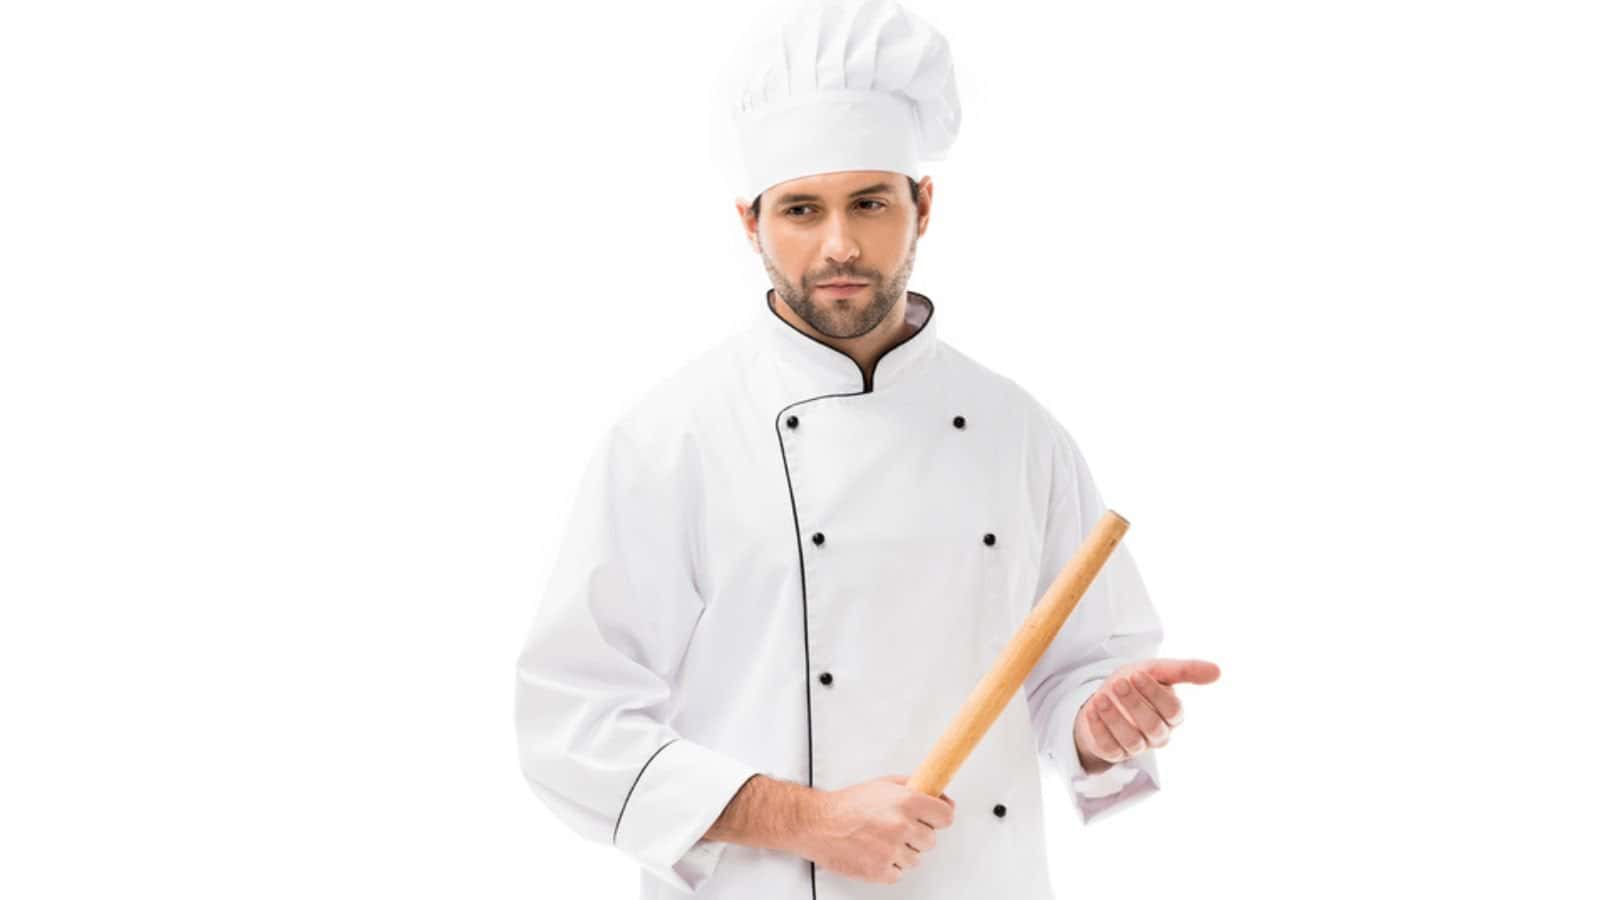 Serious young chef holding rolling pin isolated on white